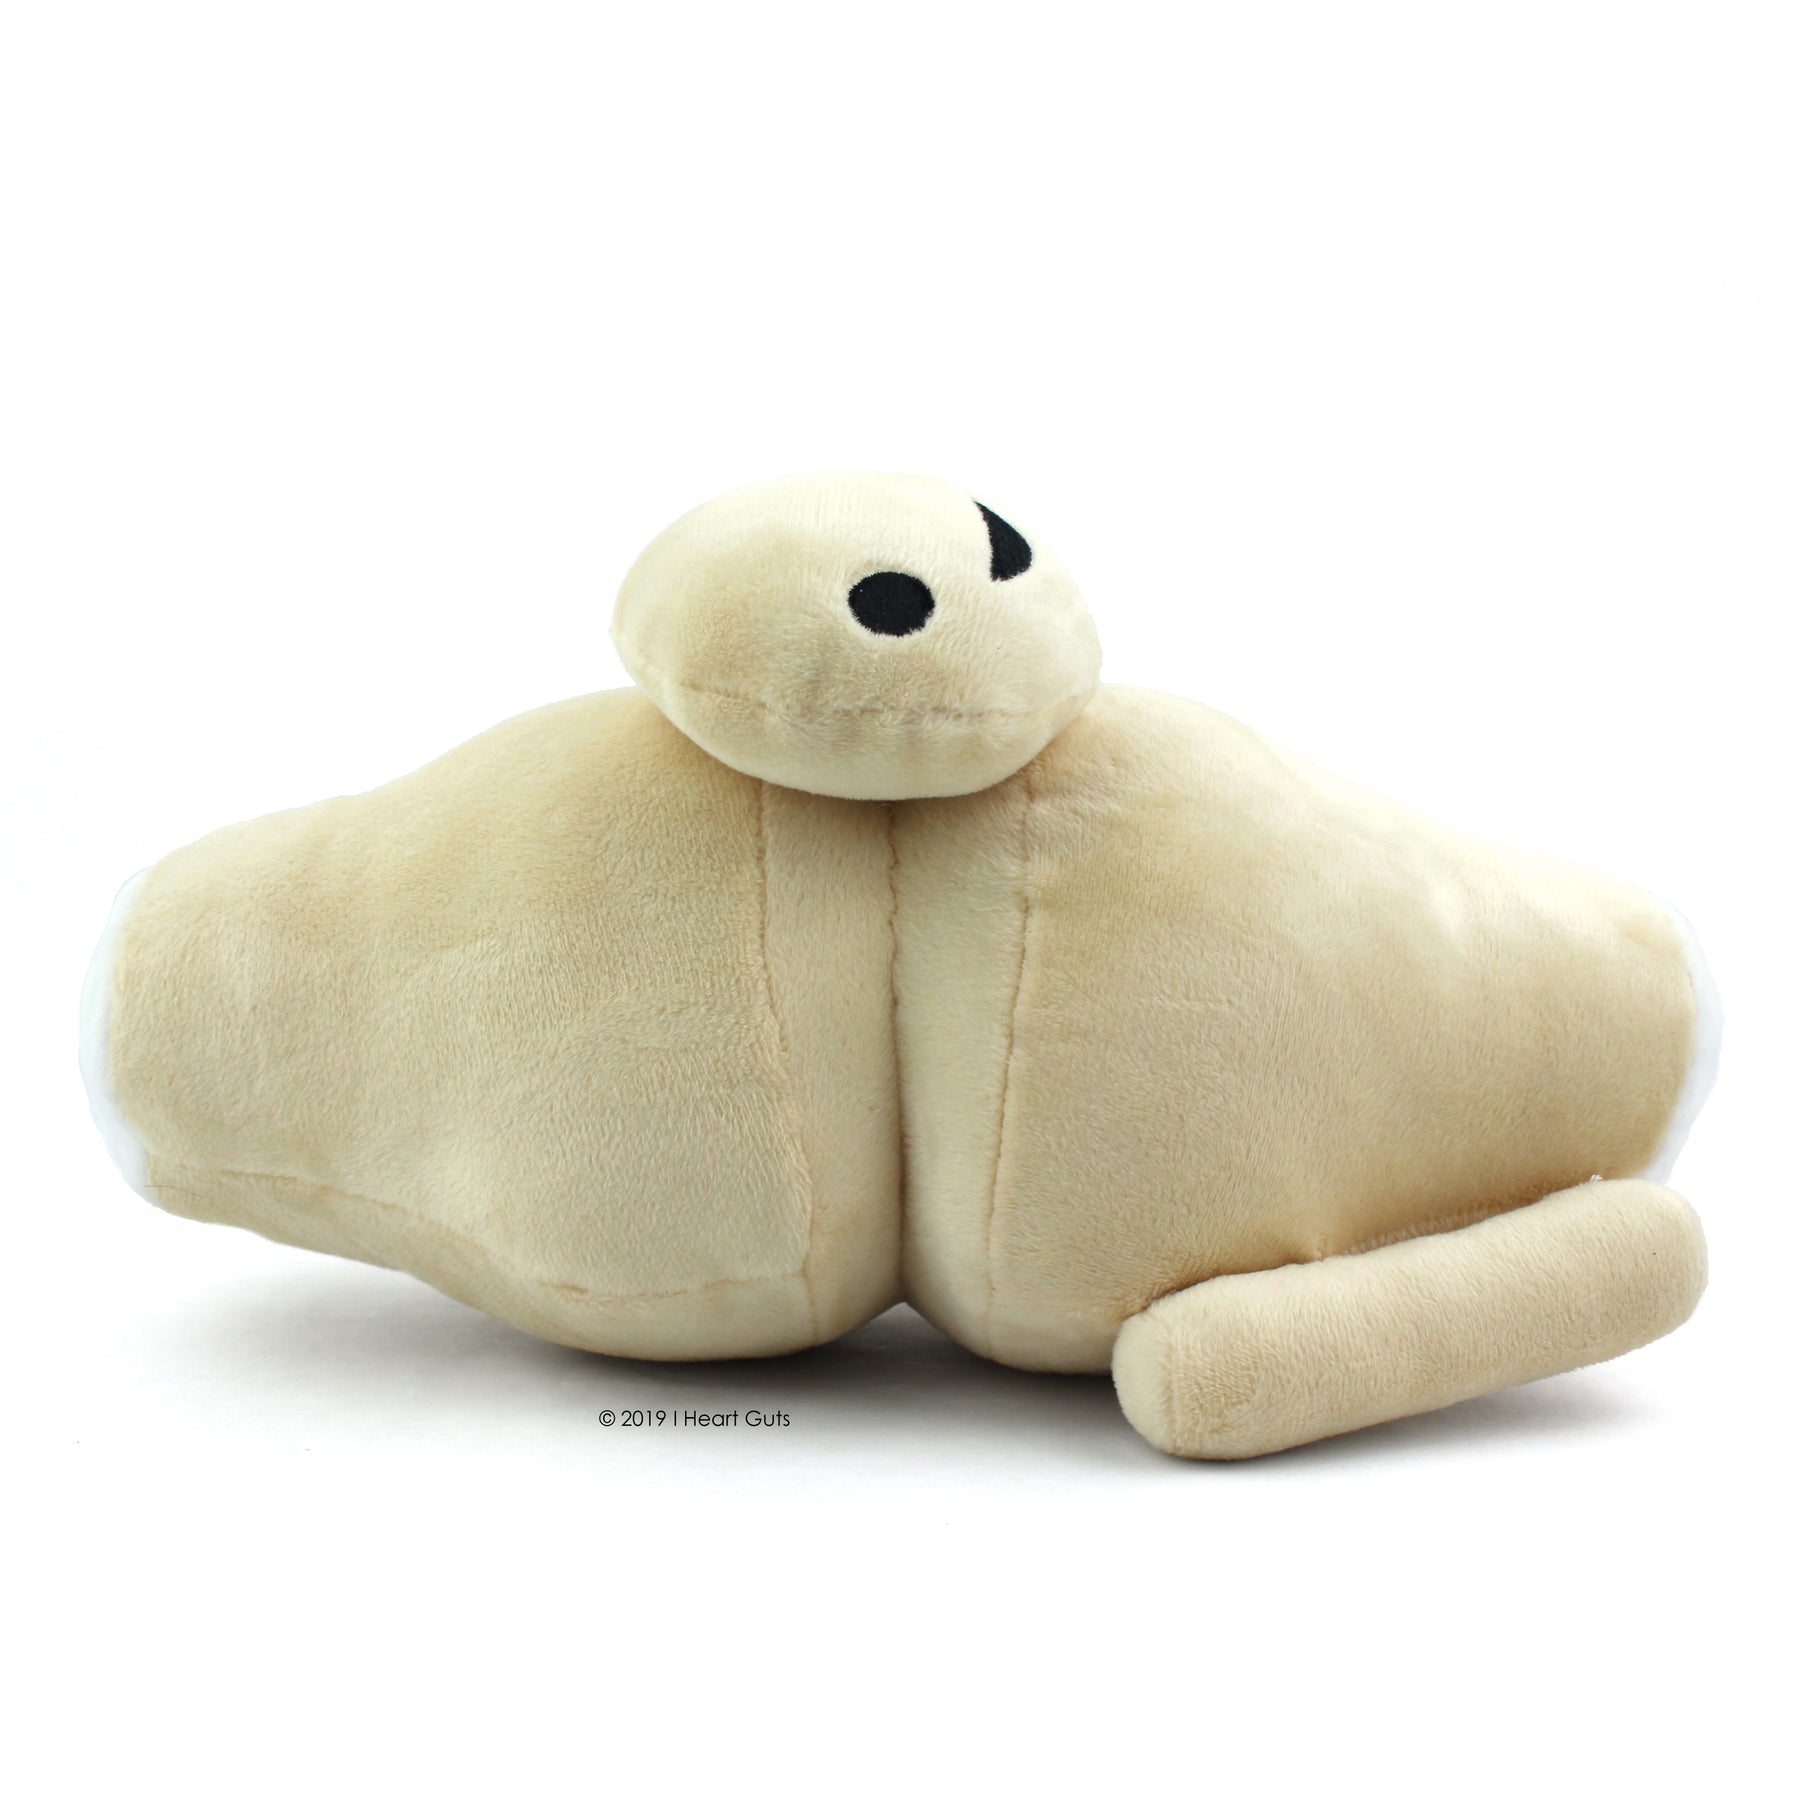 Knee Joint Plush - Kneed for Speed - Knee Replacement Gift | I Heart Guts